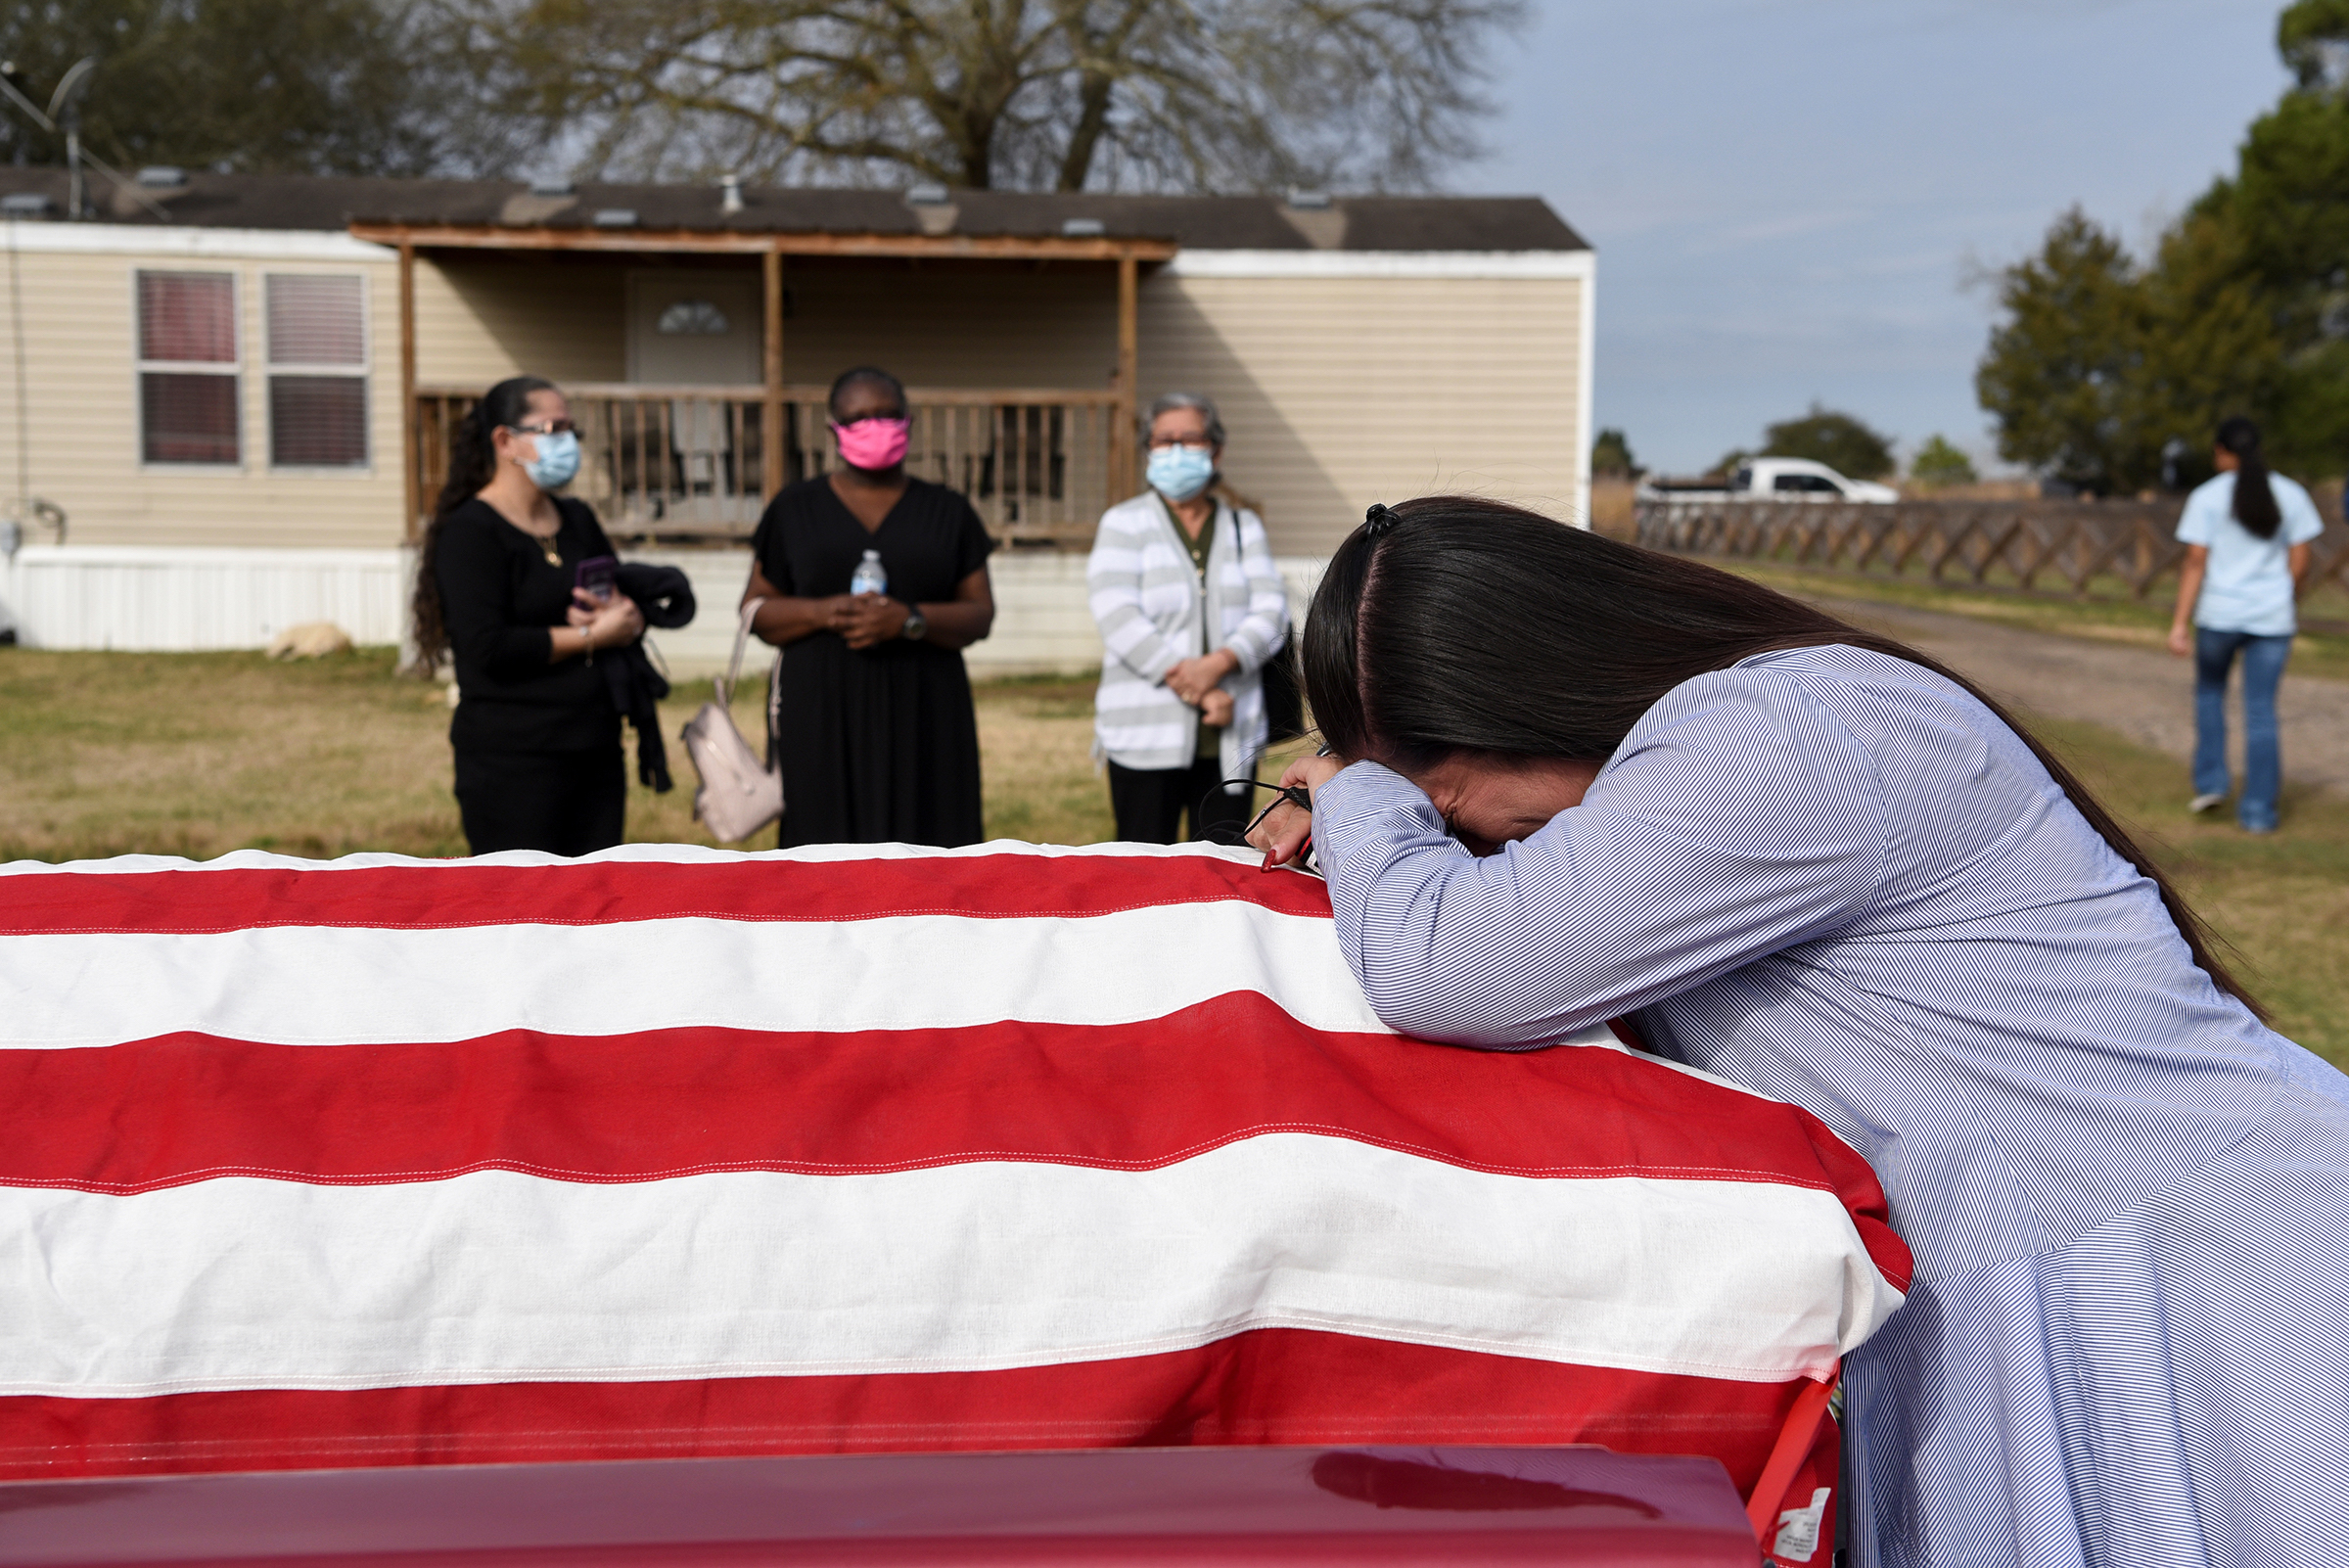 Lila Blanks weeps at the funeral of her husband, Gregory Blanks, 50, who died from COVID-19 complications, in San Felipe, Texas, on Jan. 26. "We need to all do what we need to do to get over it," she said. "So it'll be over and we don't keep burying our husbands, our children, our mothers, our fathers." (Callaghan O'Hare—Reuters)